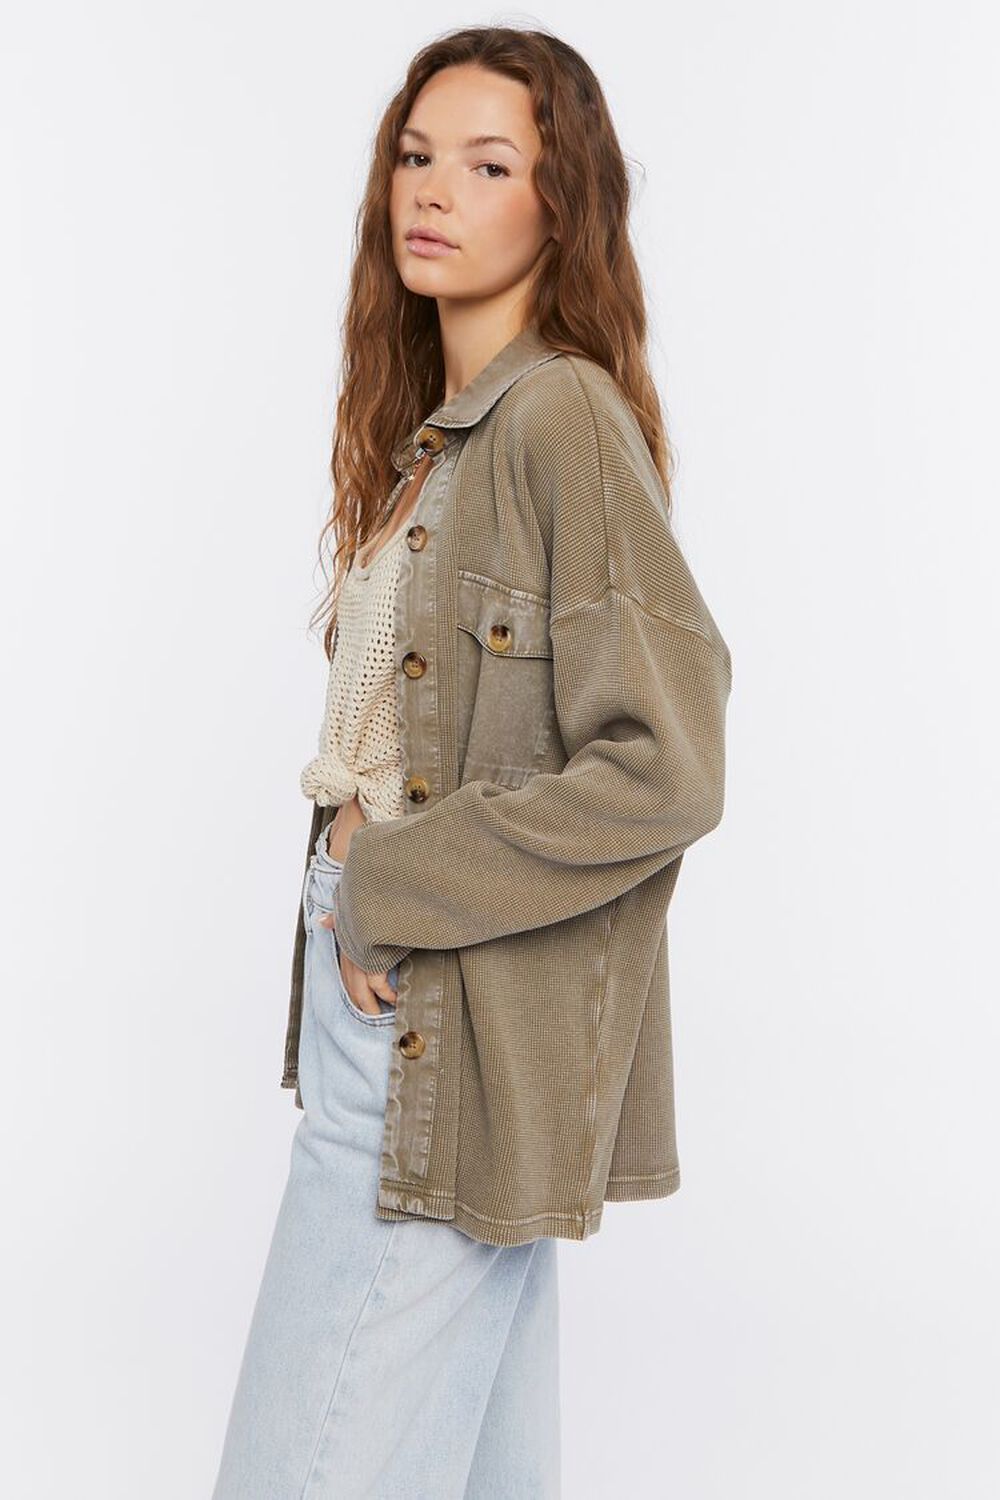 Drop-Sleeve Button-Up Shacket | Forever 21 | Forever 21 (US)